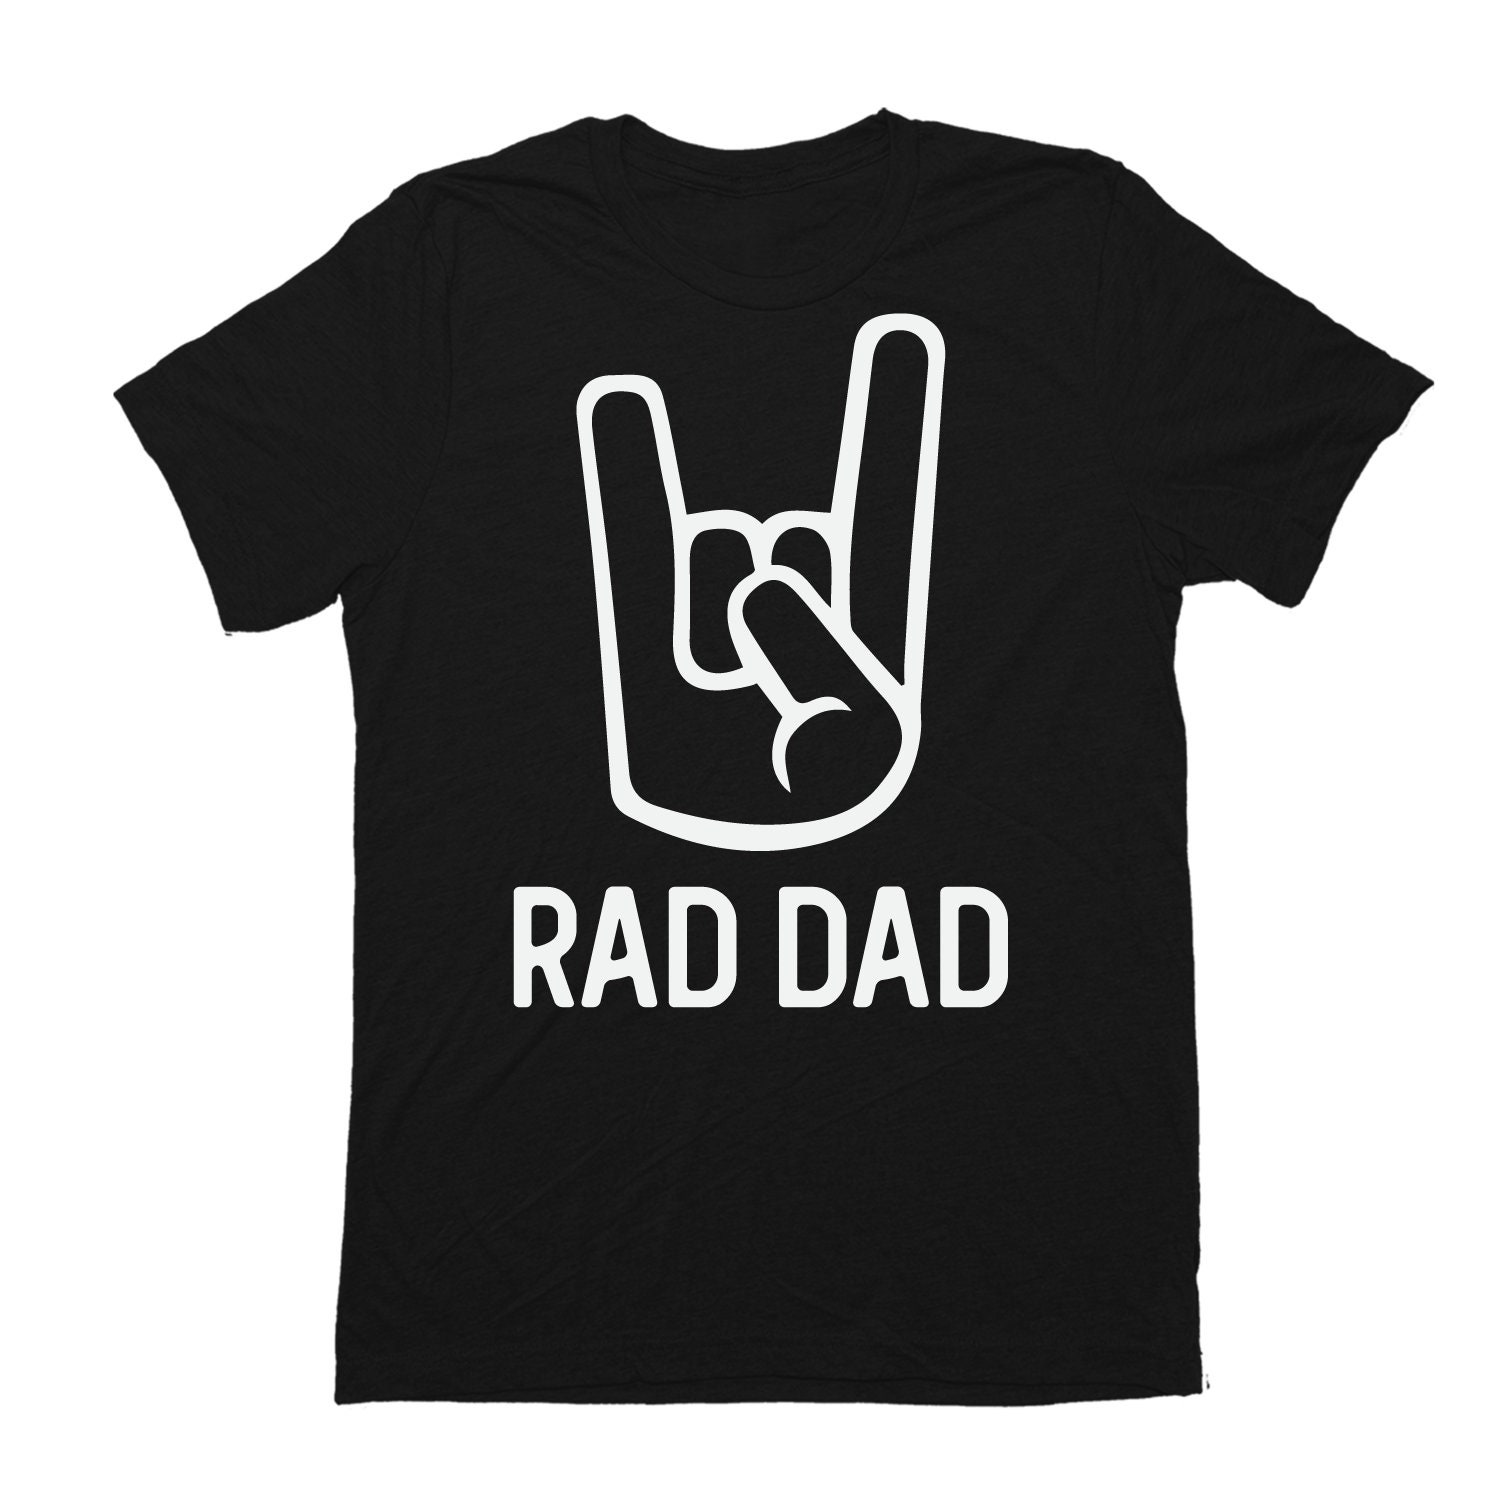 Rad Dad T-shirt Rad Dad Shirt Dad Gift T-shirt Radical Shirt for Dad ...